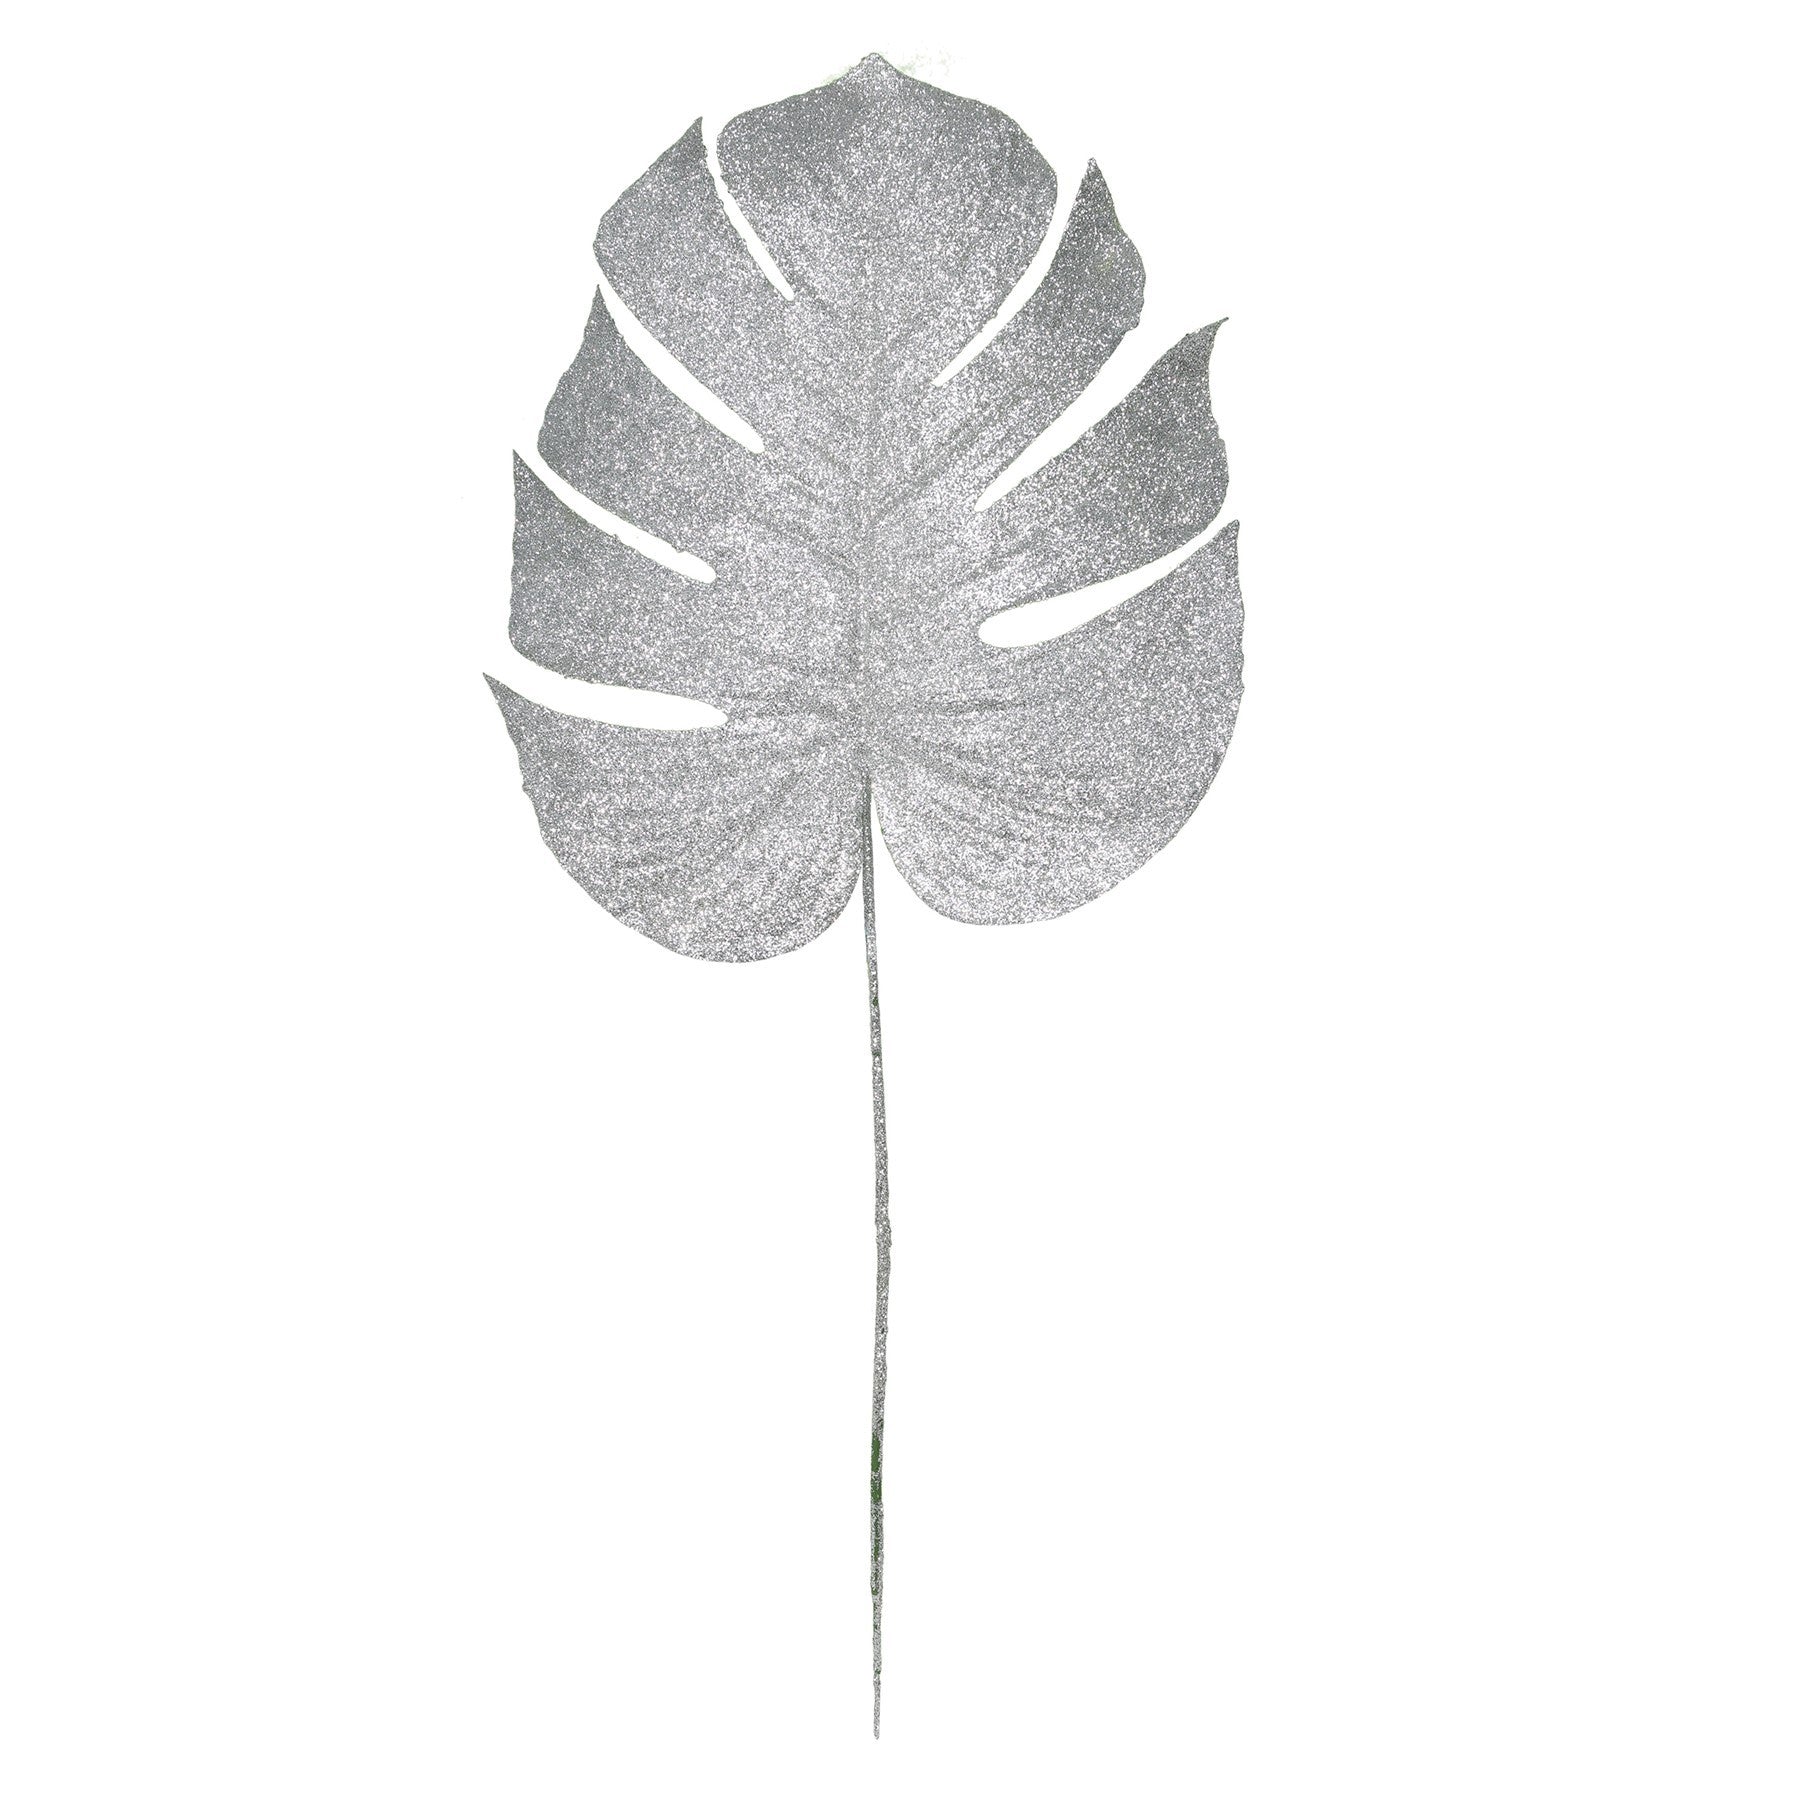 View Silver Glitter Monstera Leaf Large information